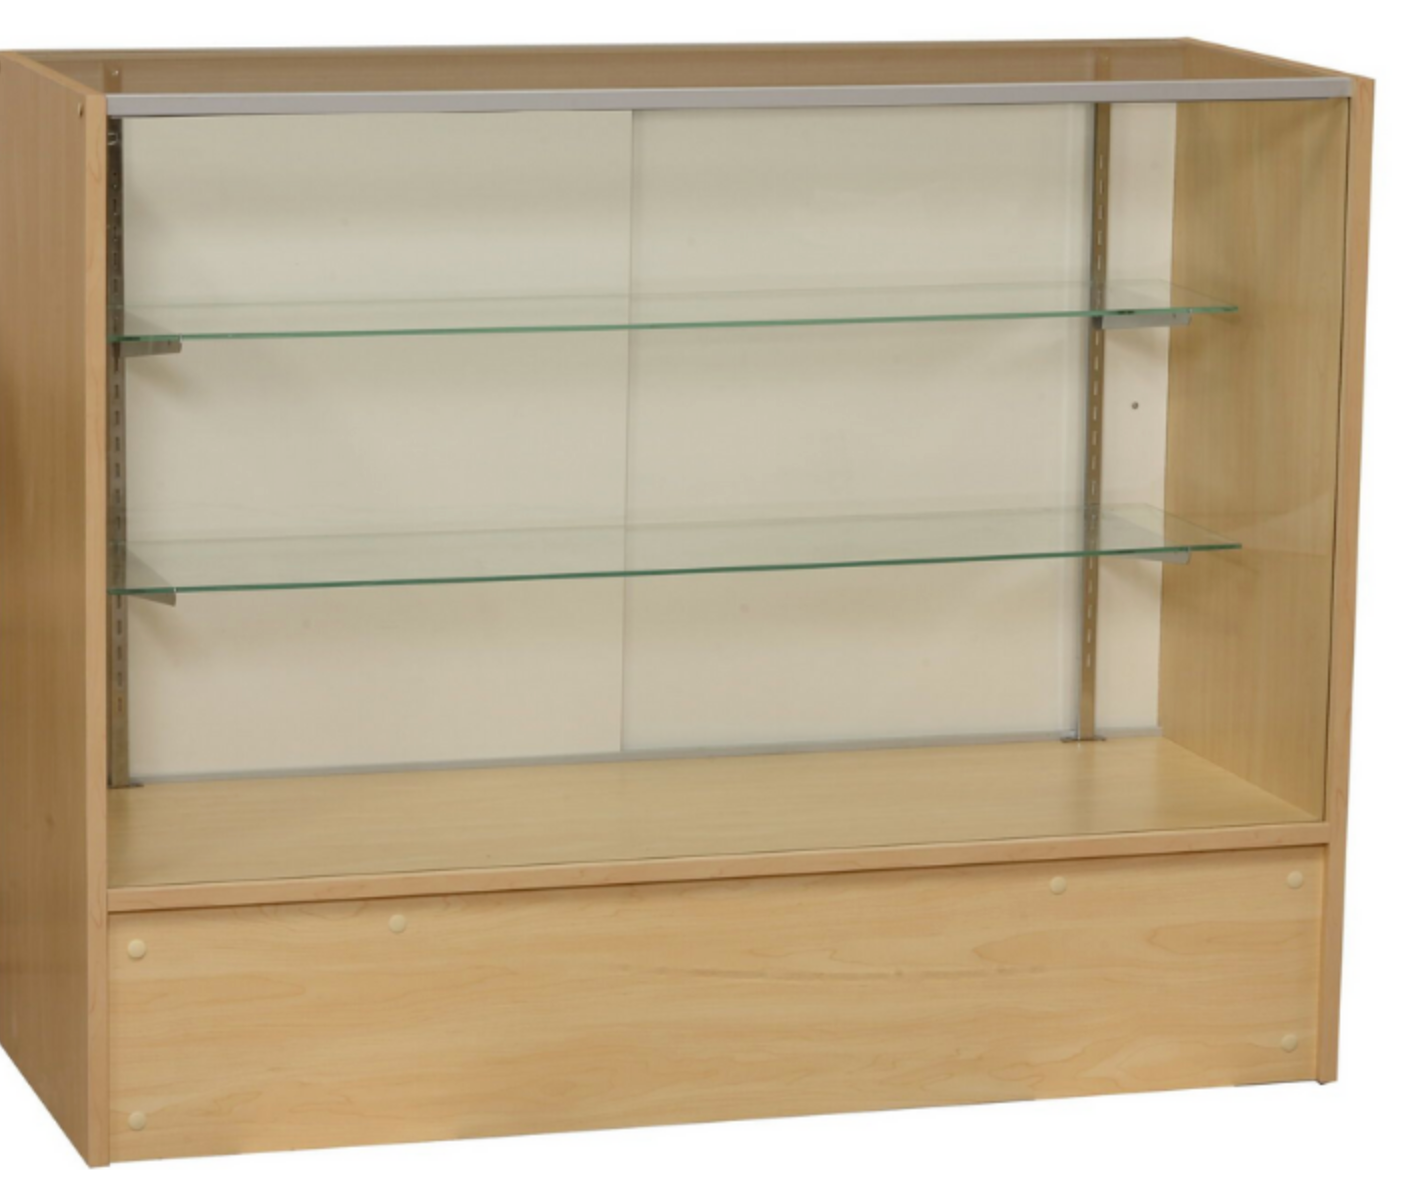 Wood Full Vision Display 70 Inch Showcase with Adjustable Glass Shelving/FS6